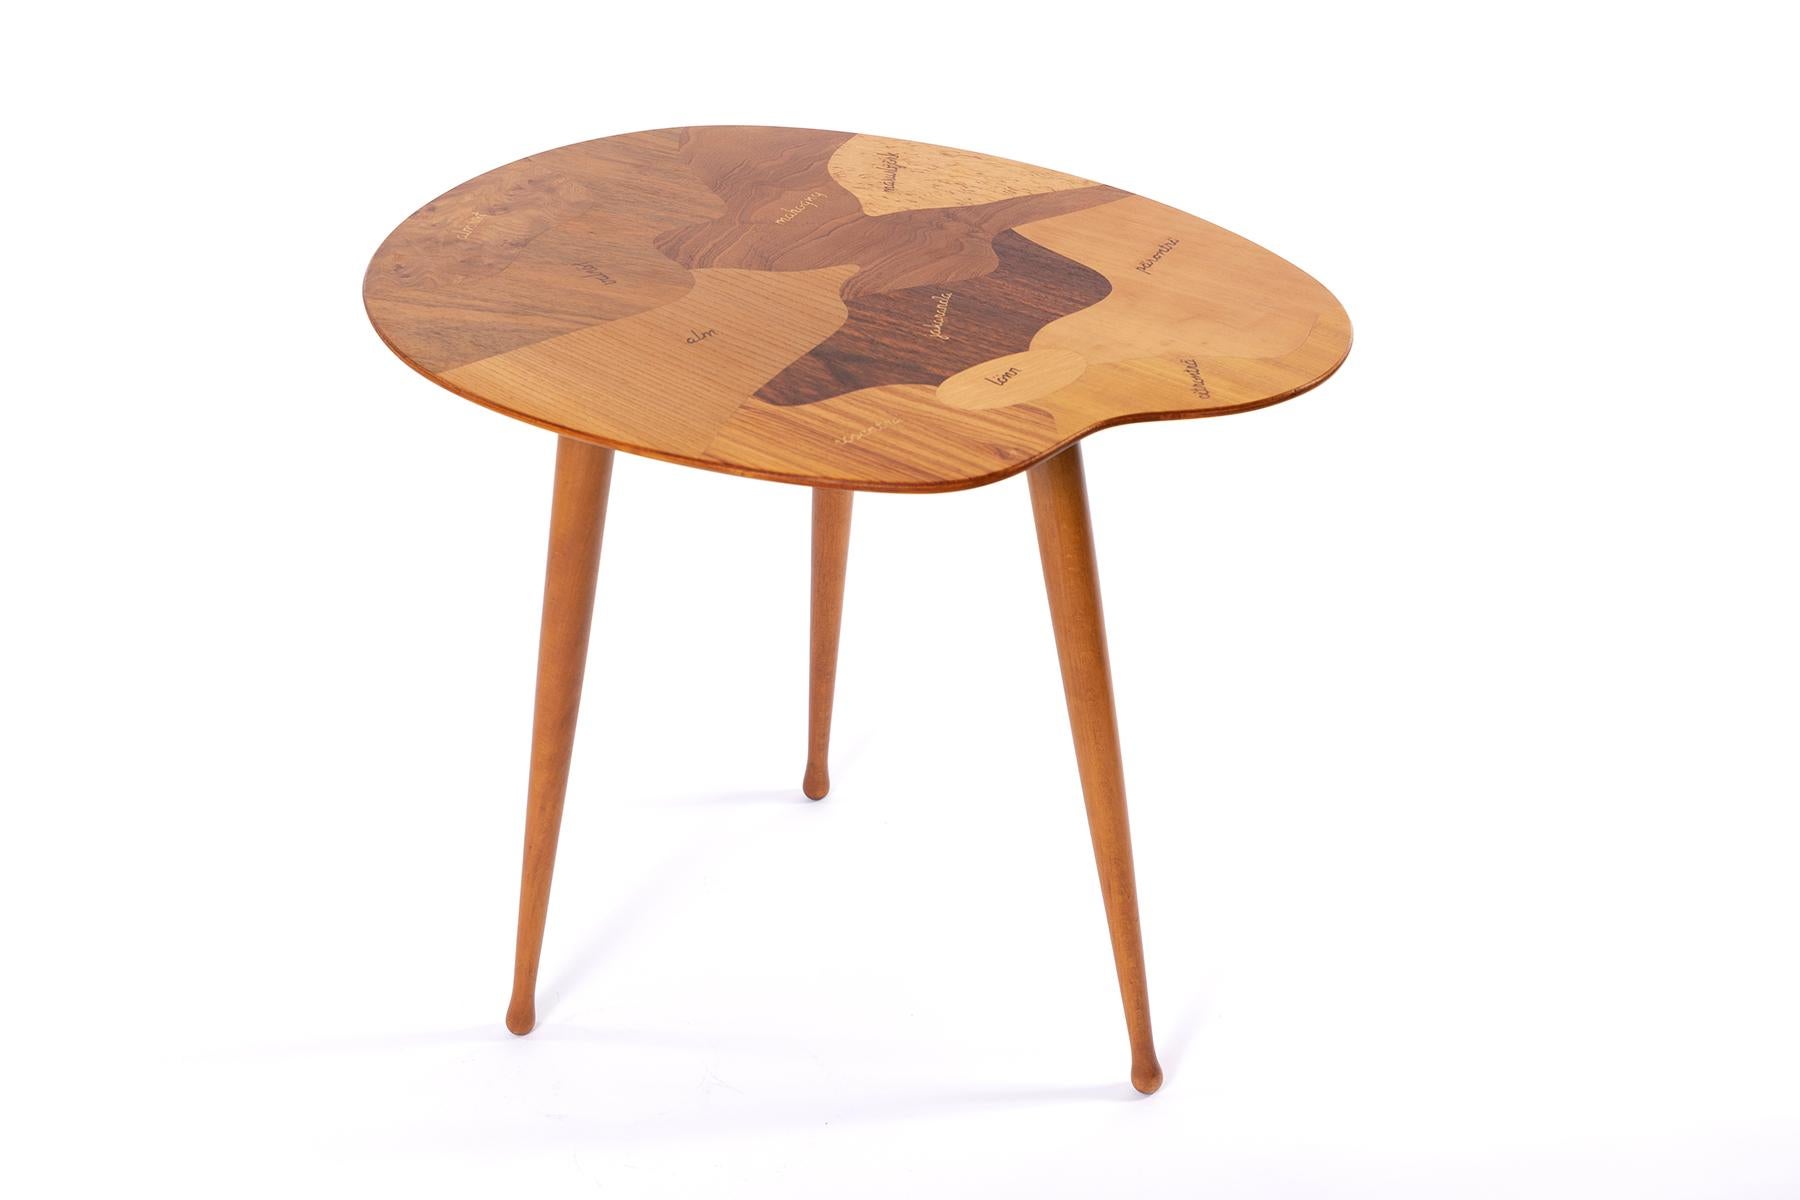 Painters palette side table in a variety of woods playfully listed and displayed in Swedish. Legs are easily removable.